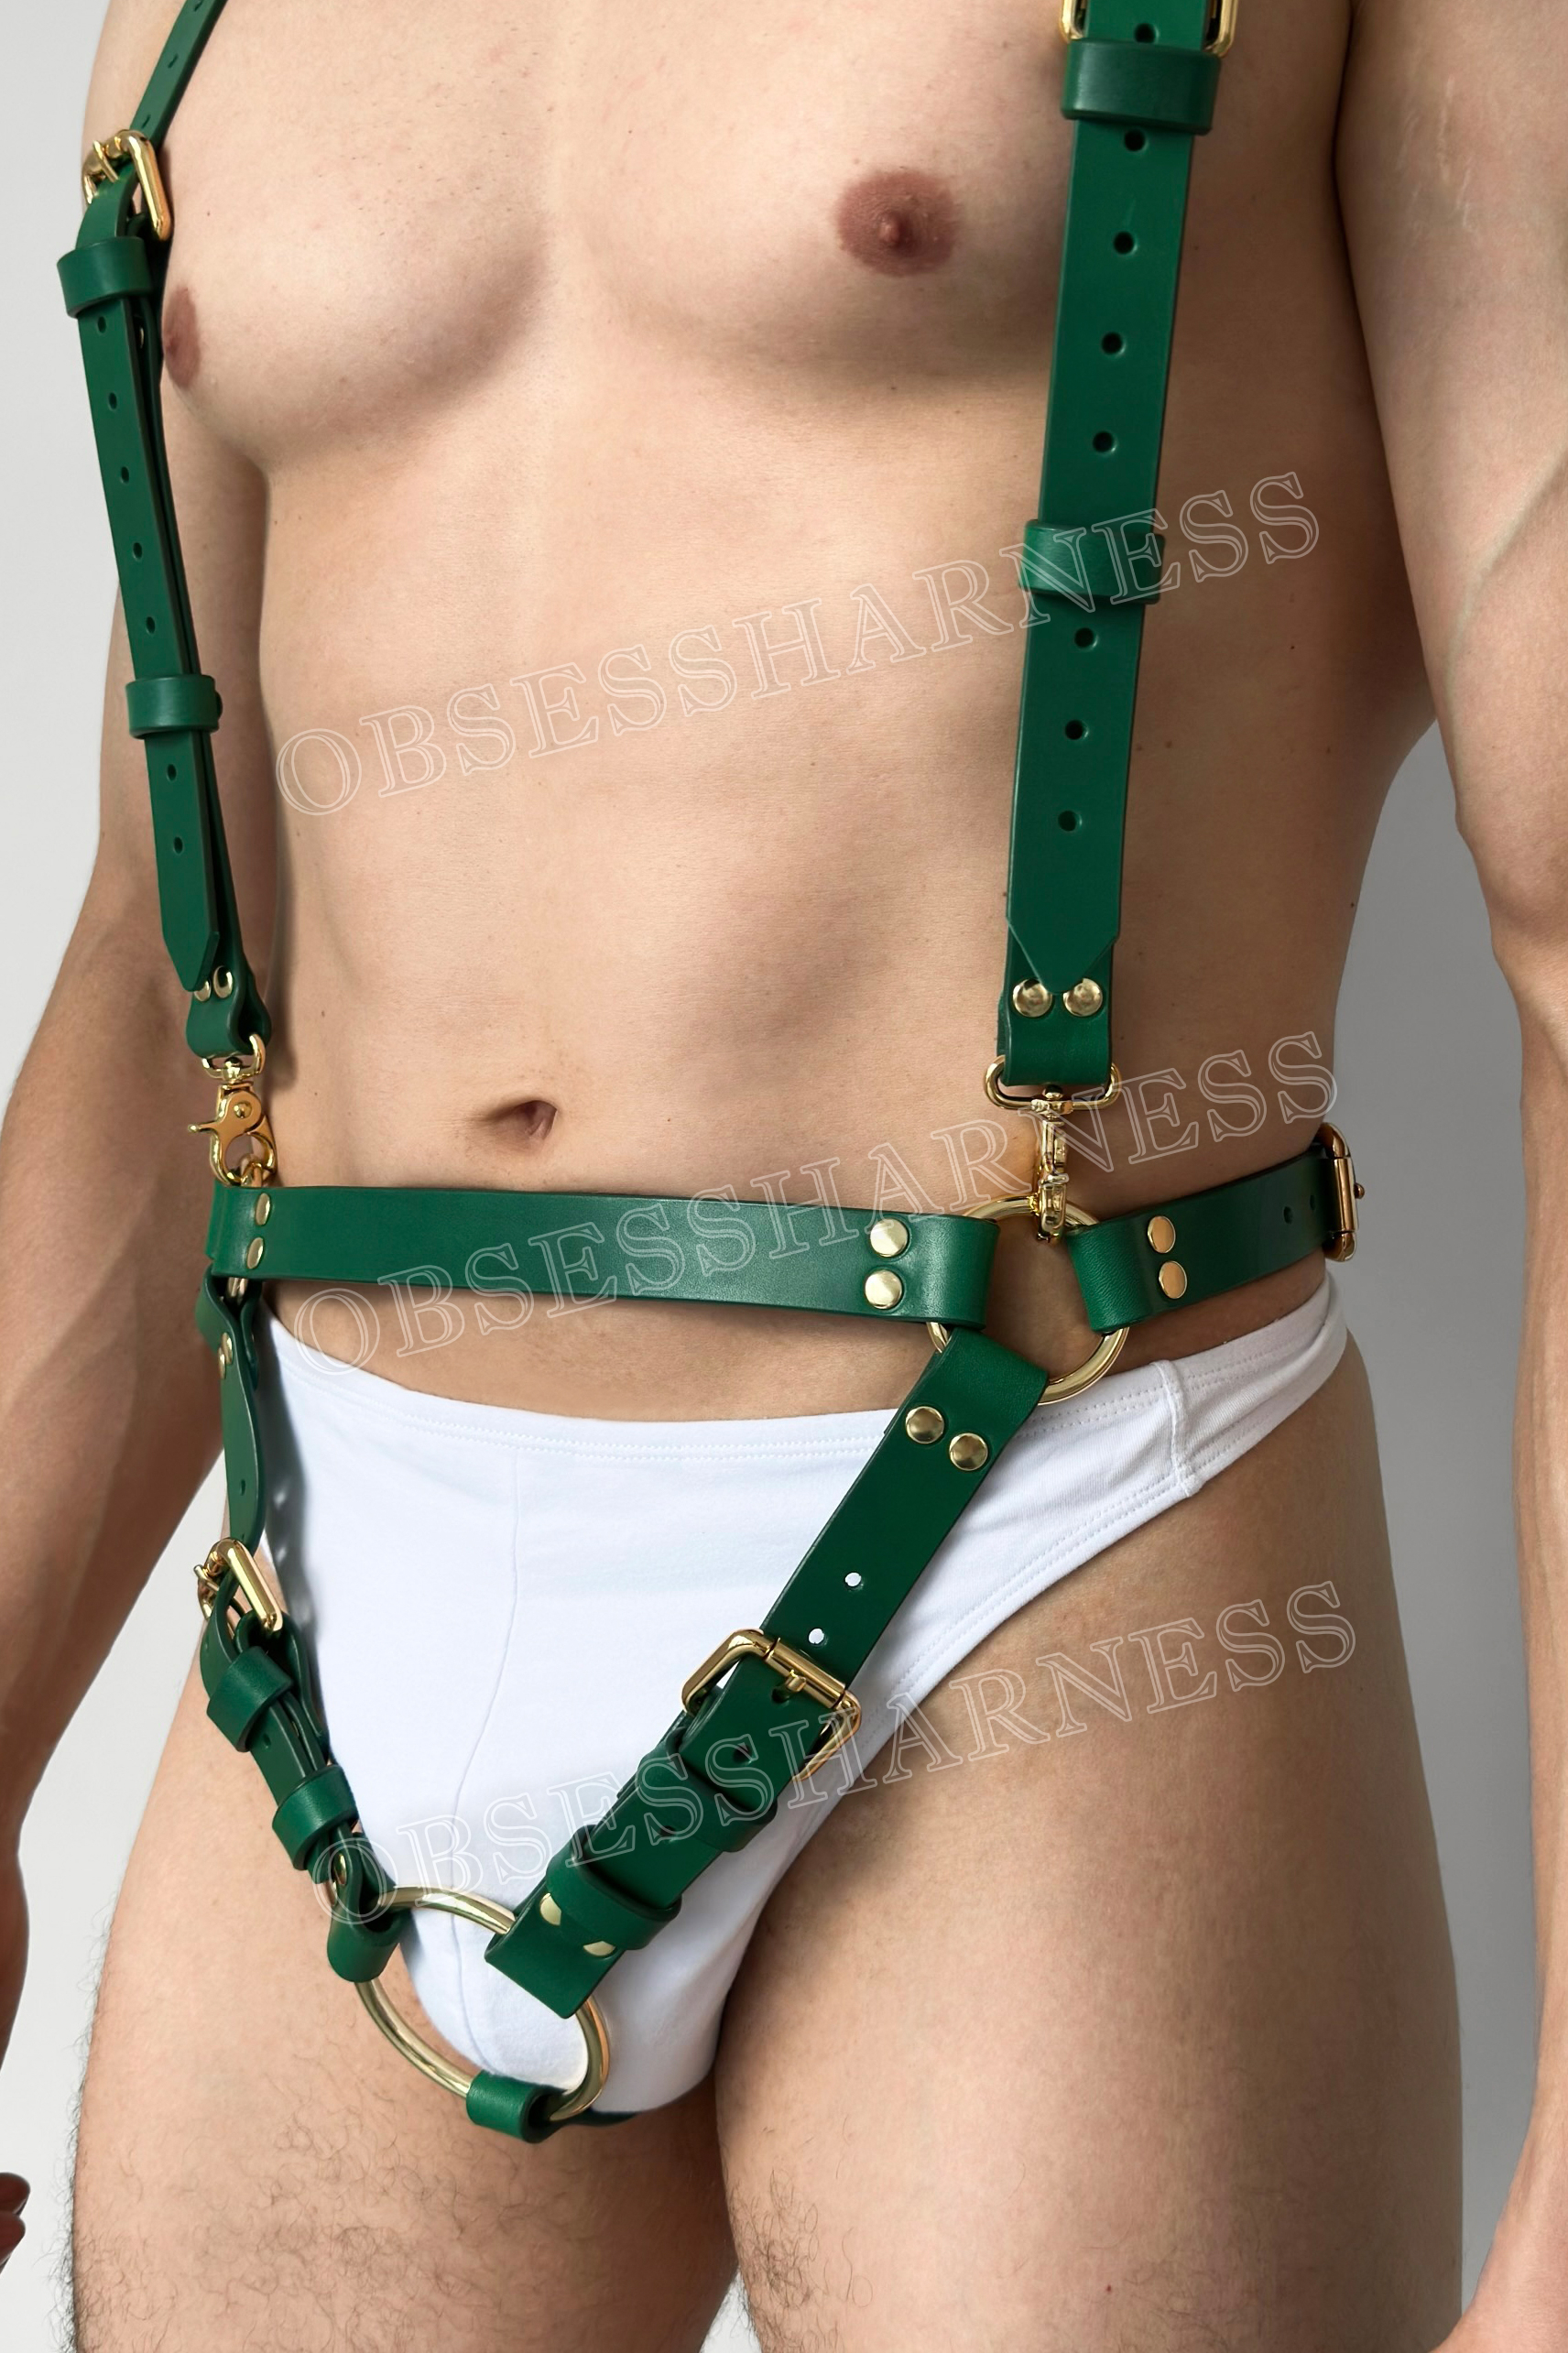 Cross body harness cock ring for a man's penis during sex and role-playing games